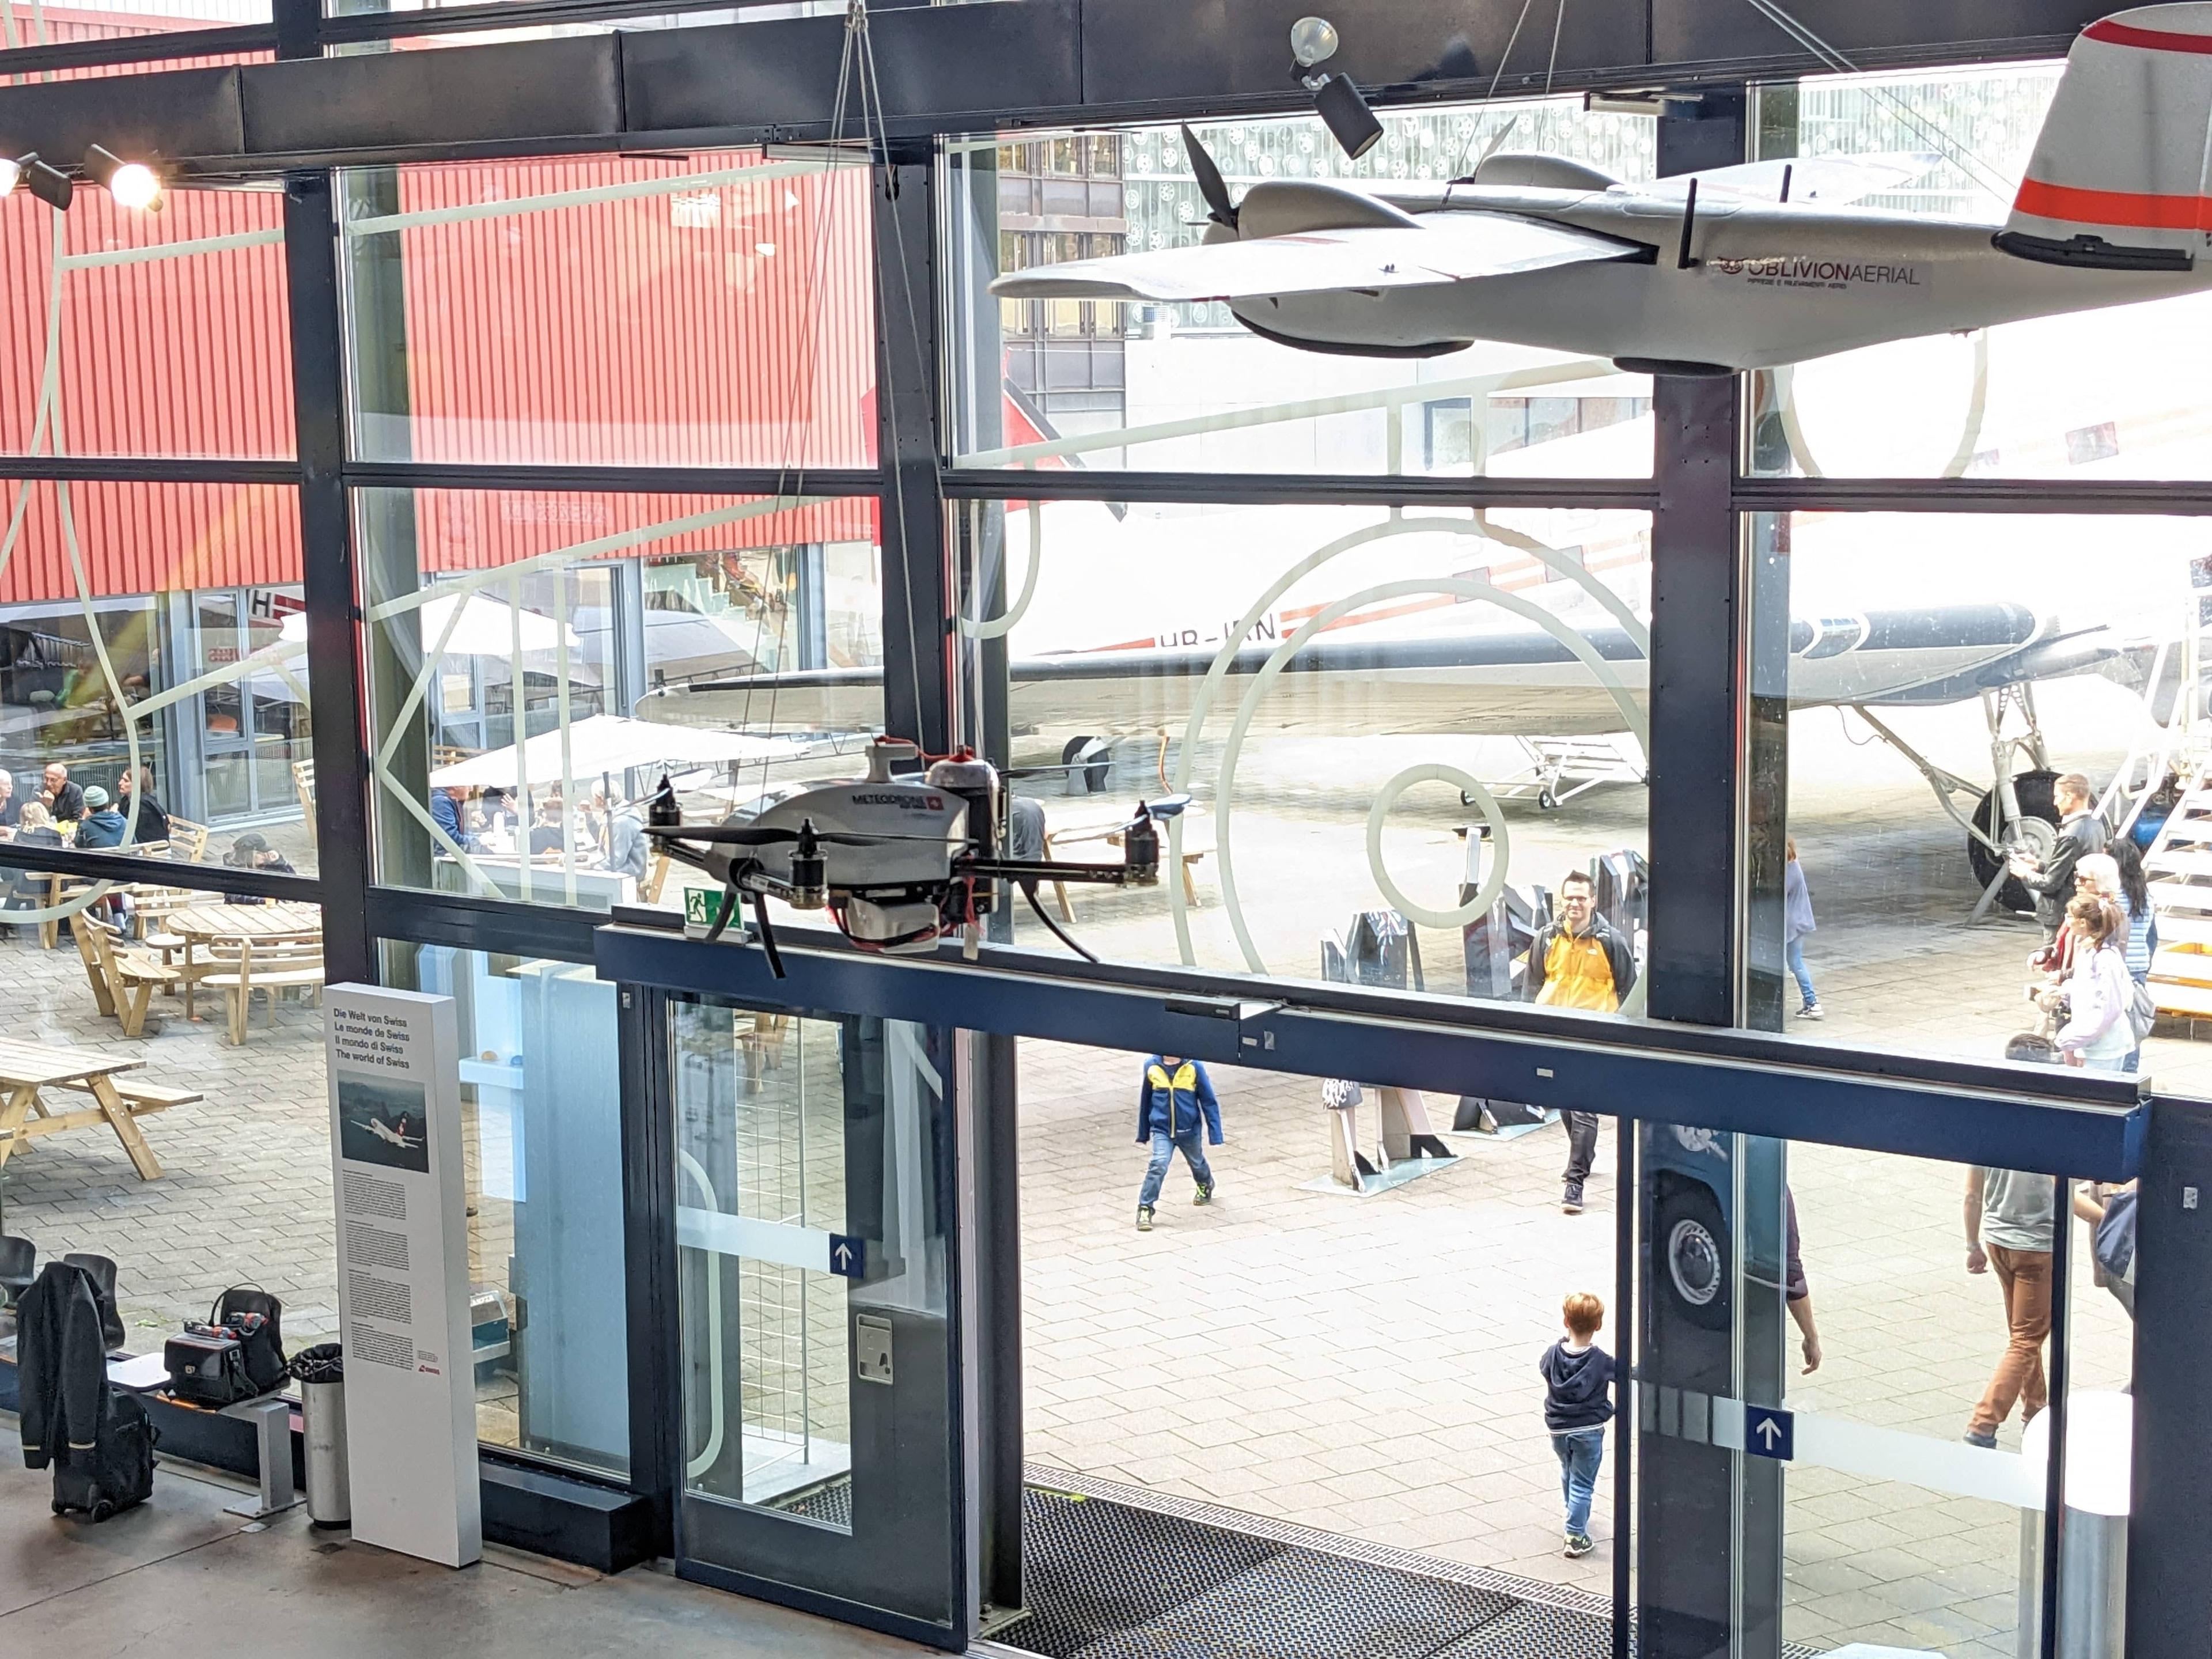 meteodrone at the swiss museum of transport